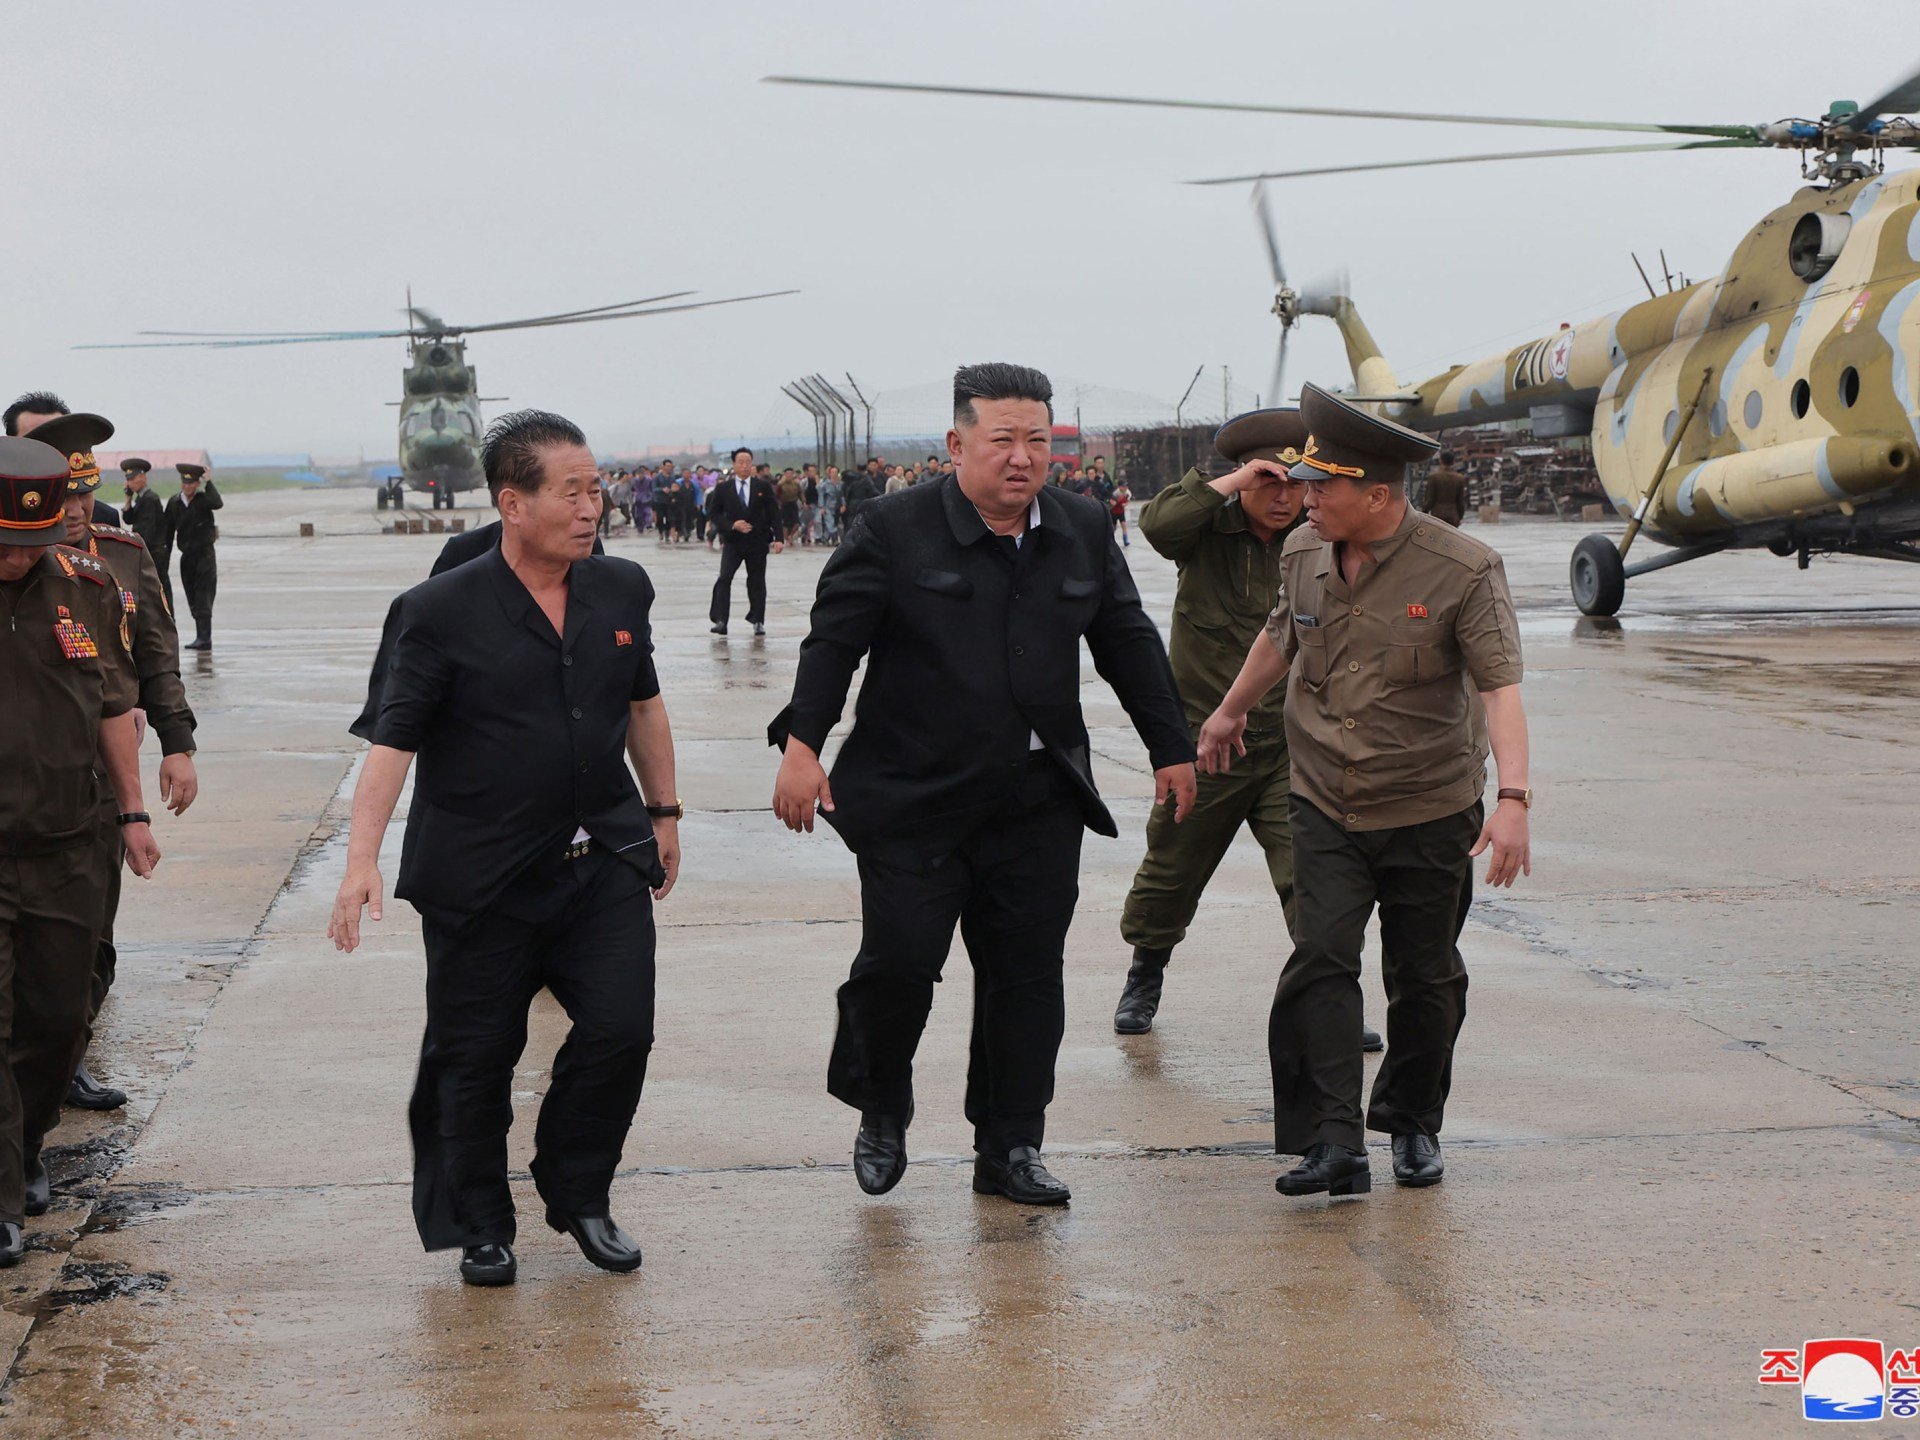 North Korea uses military helicopters to rescue thousands from floods